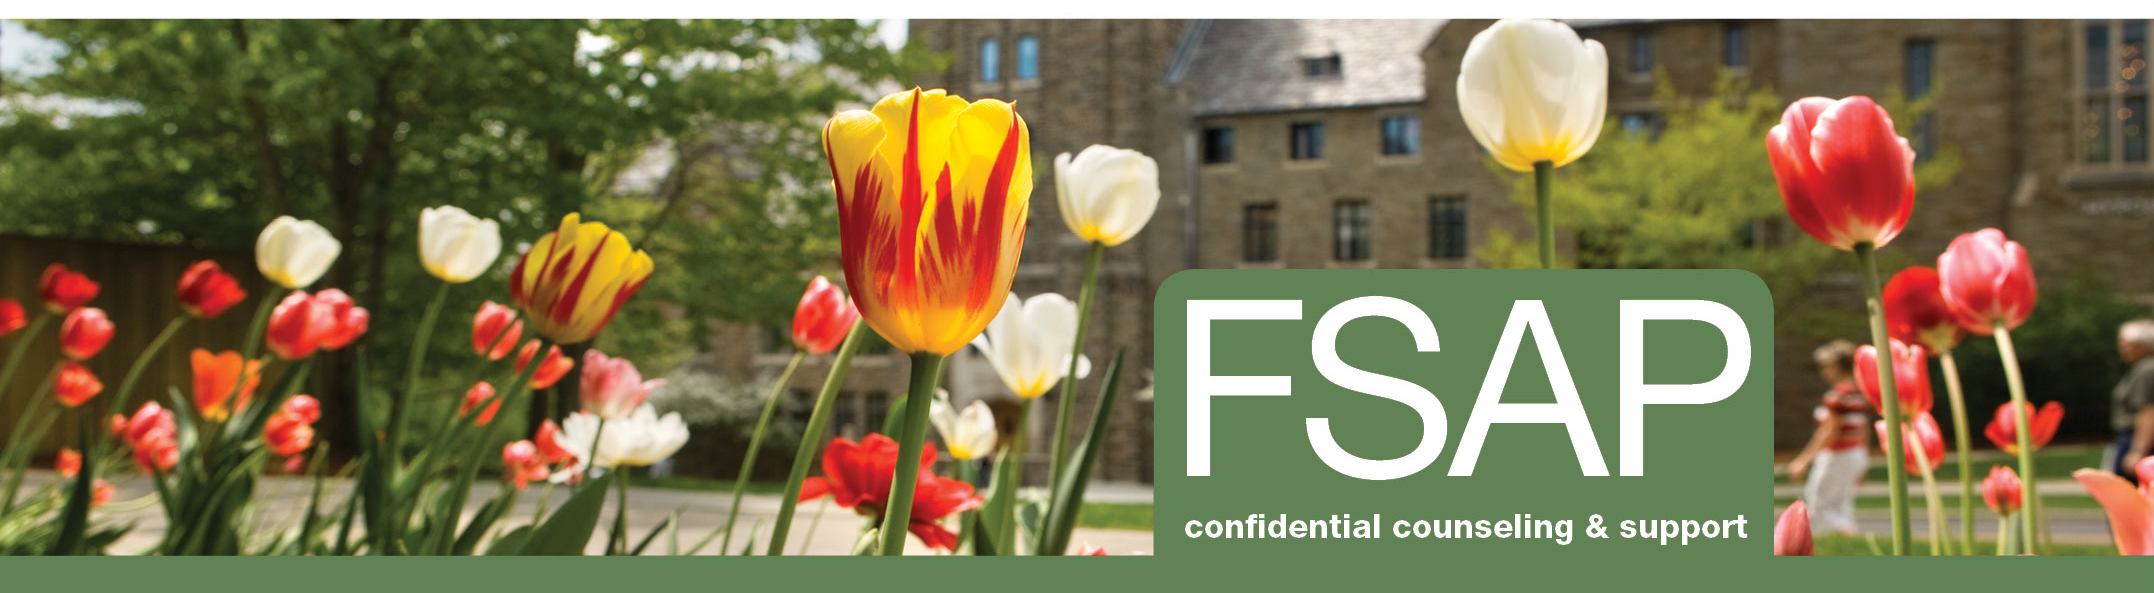 FSAP: confidential counseling & support